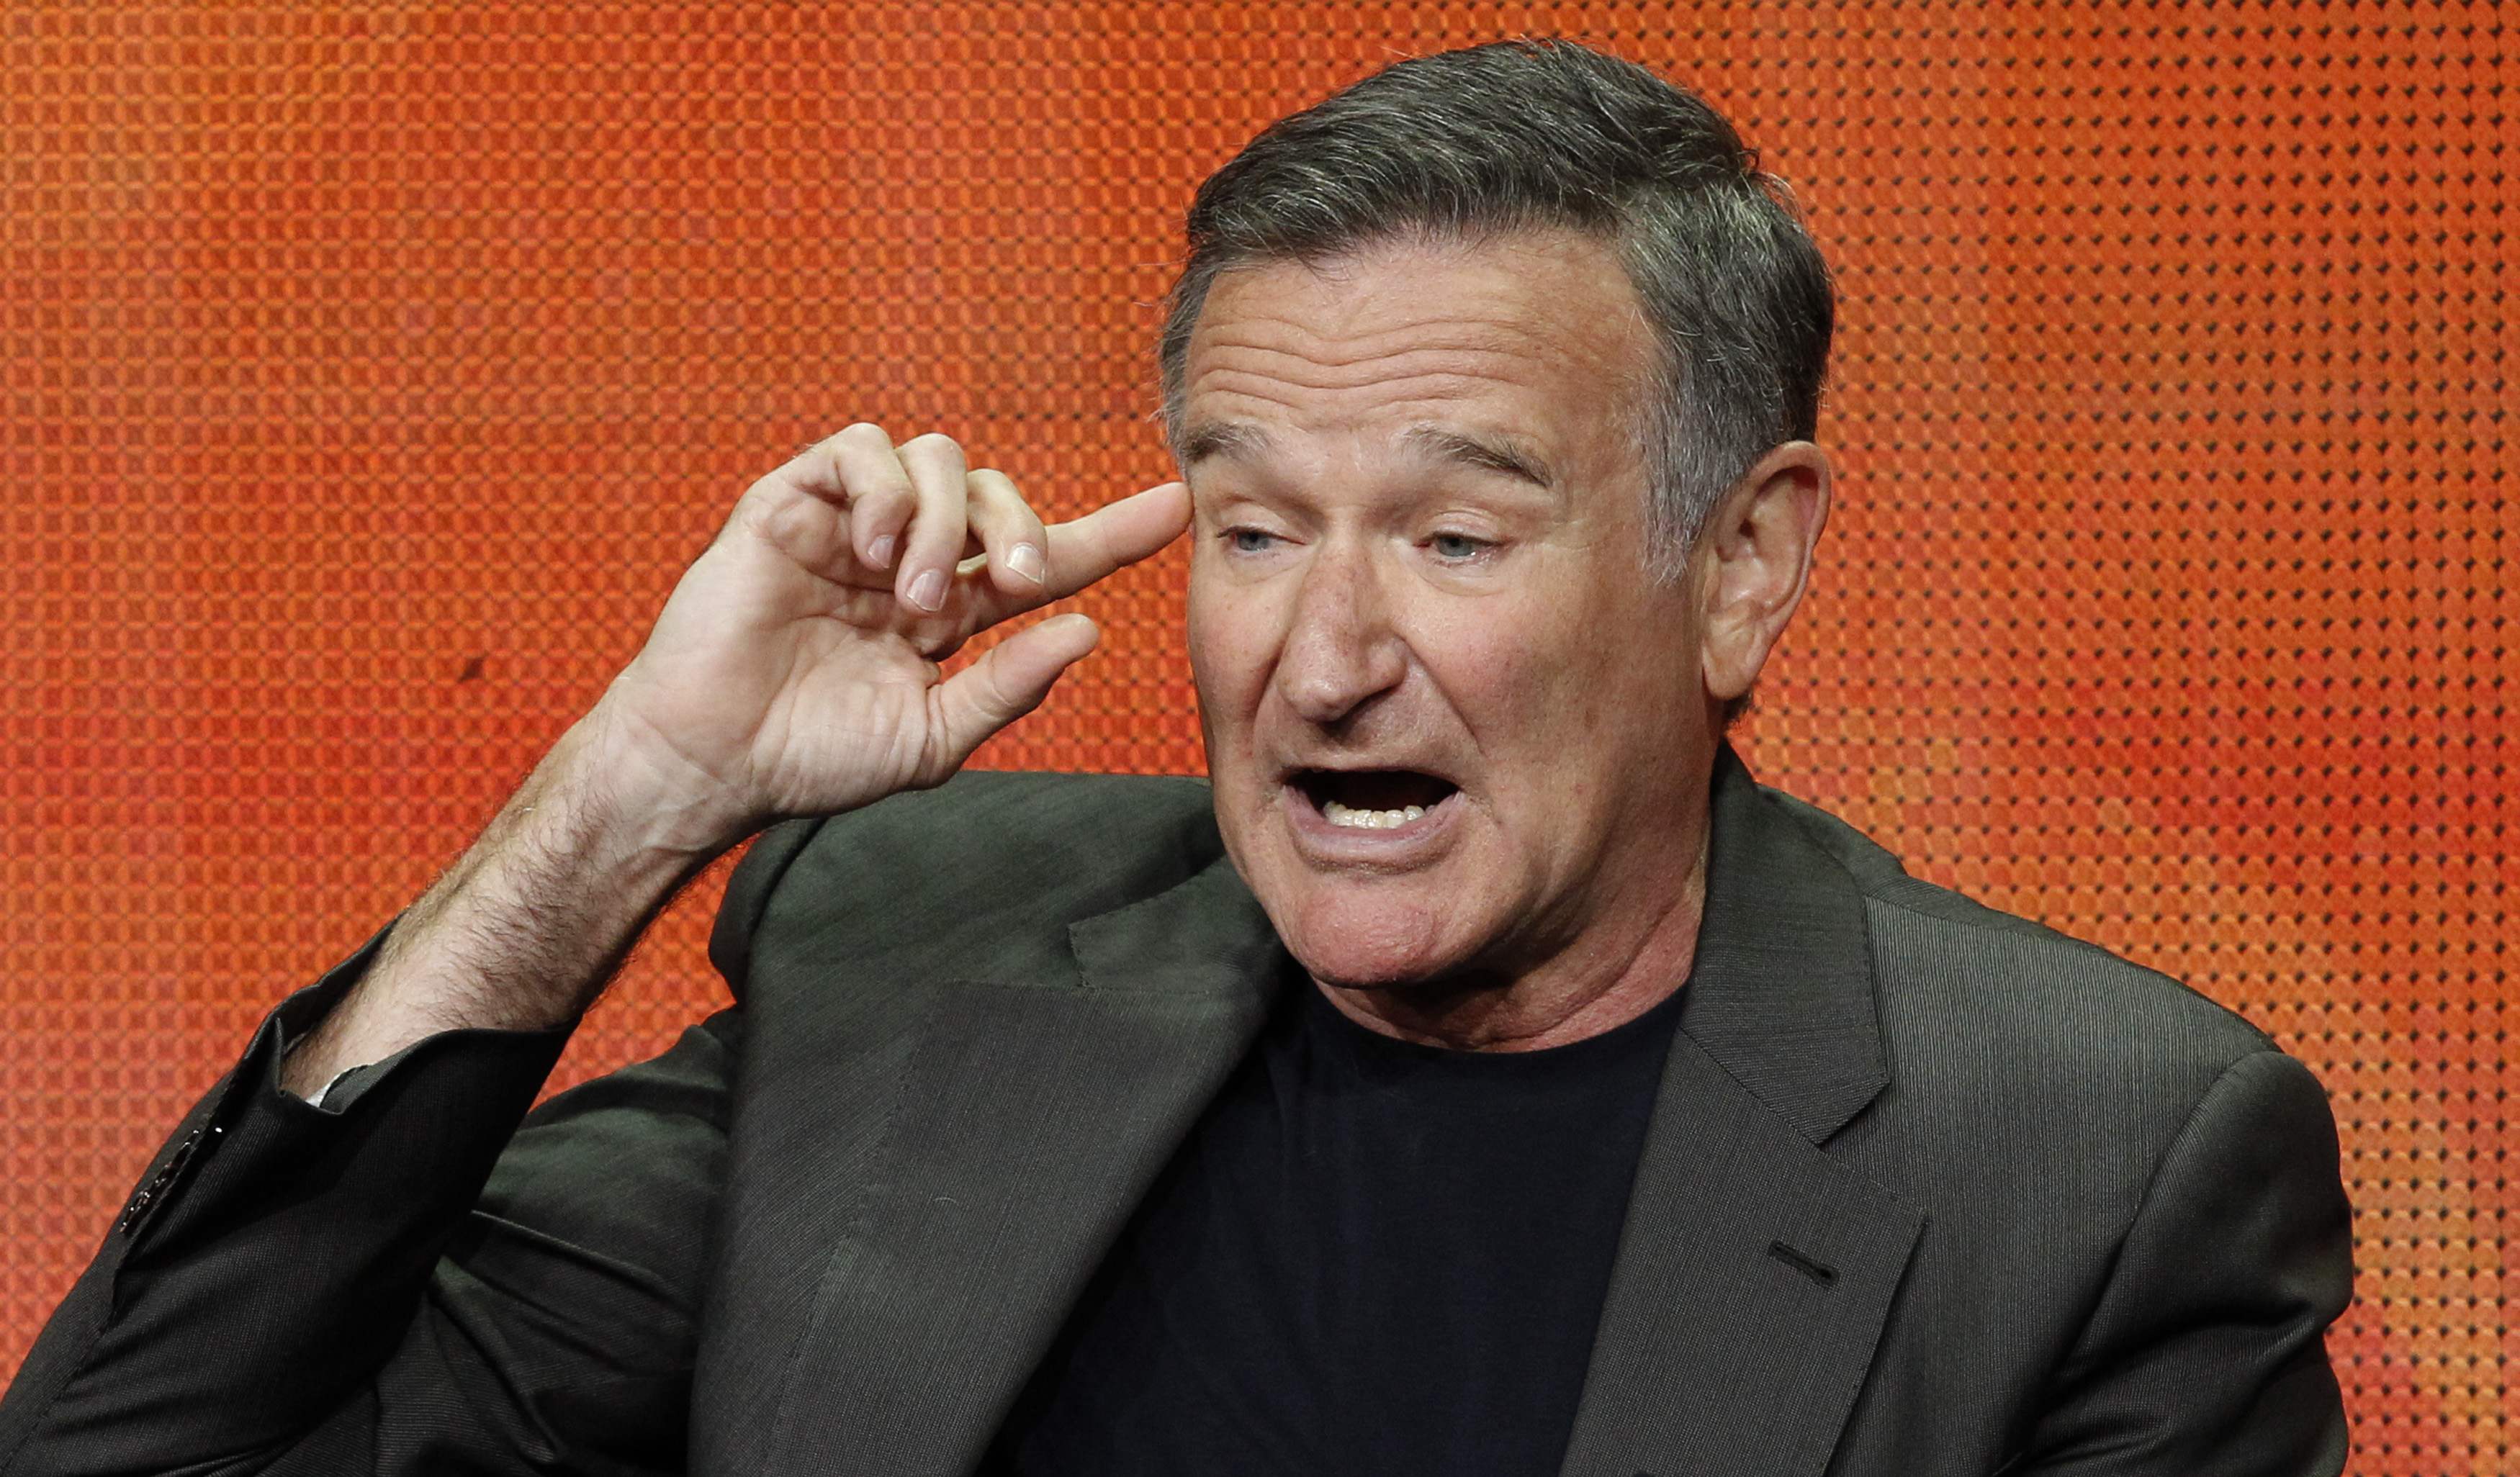 Robin Williams' live performances made audience scream with laughter. Photo: Reuters